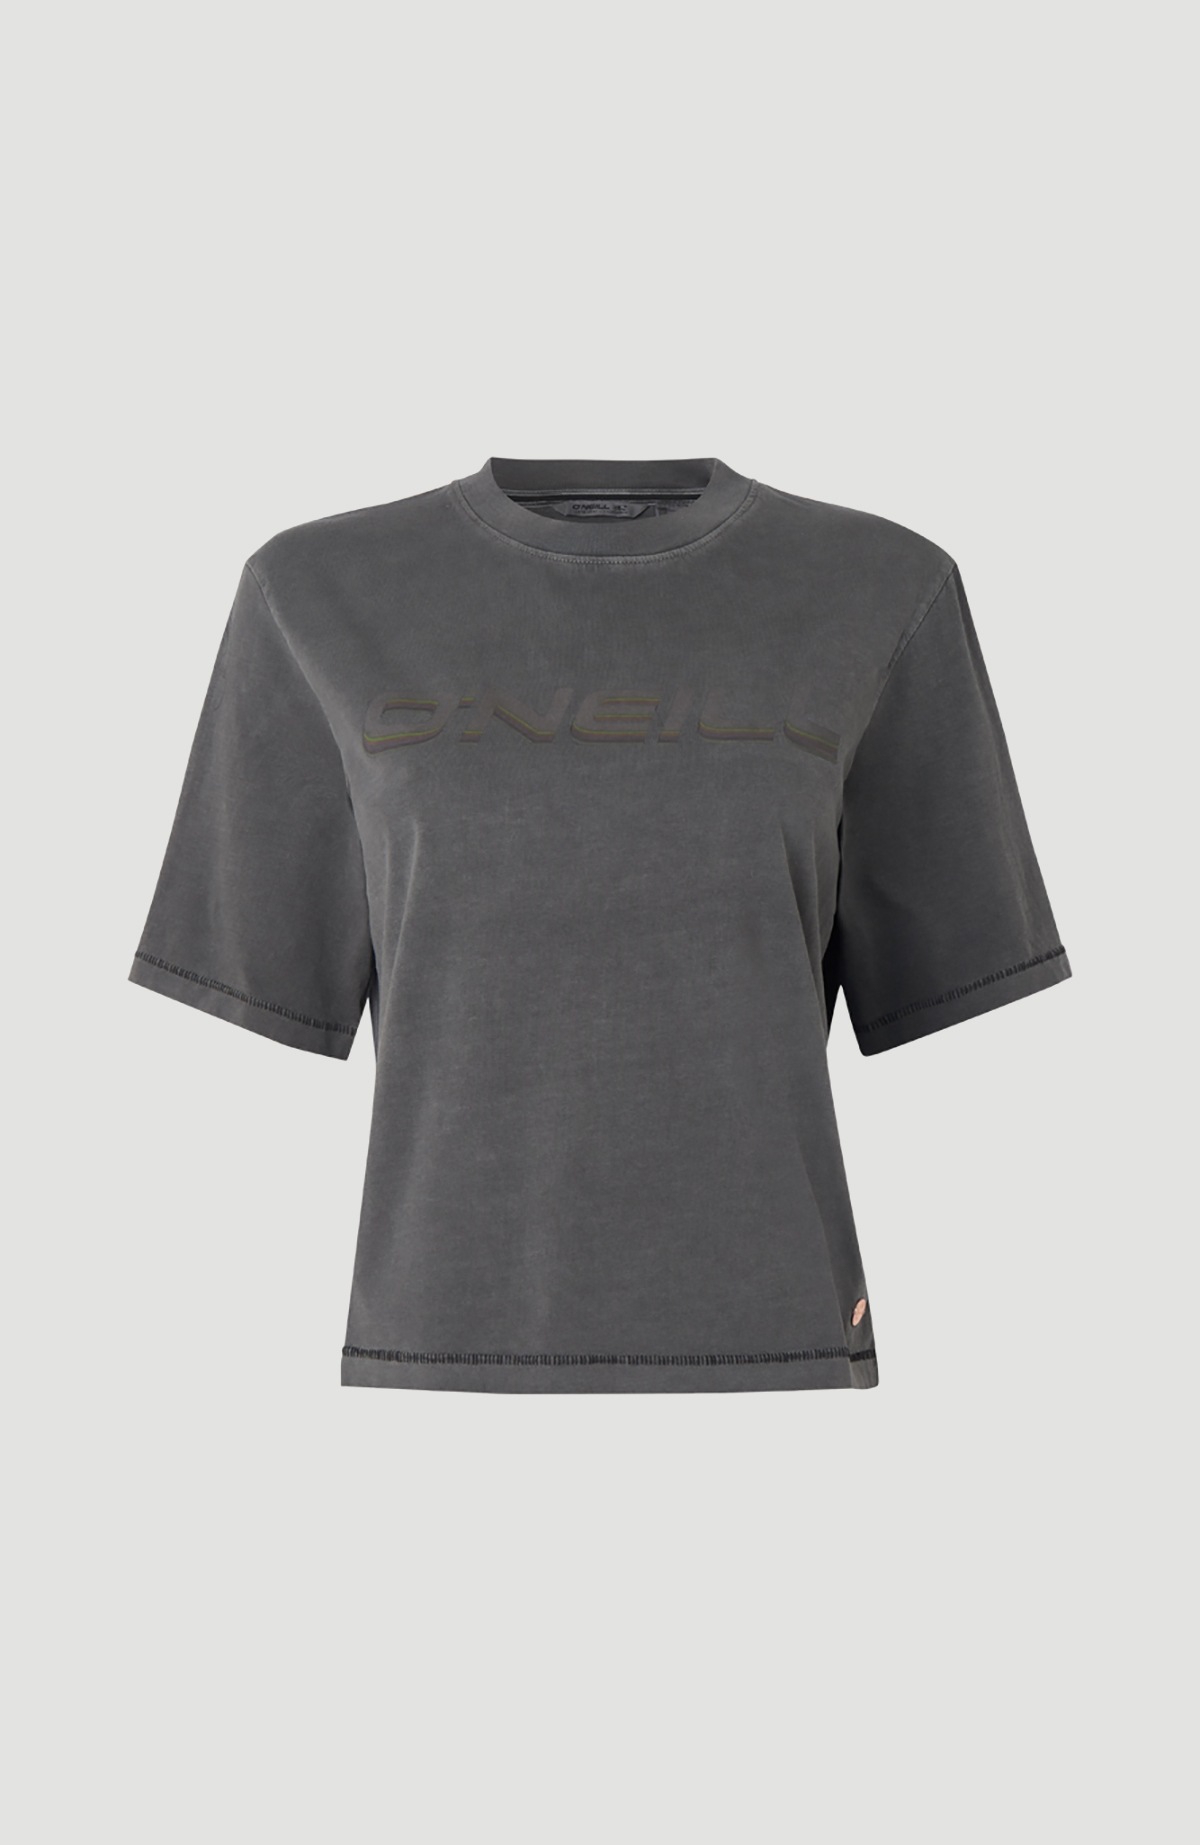 O'Neill T-Shirt »Re-issue«